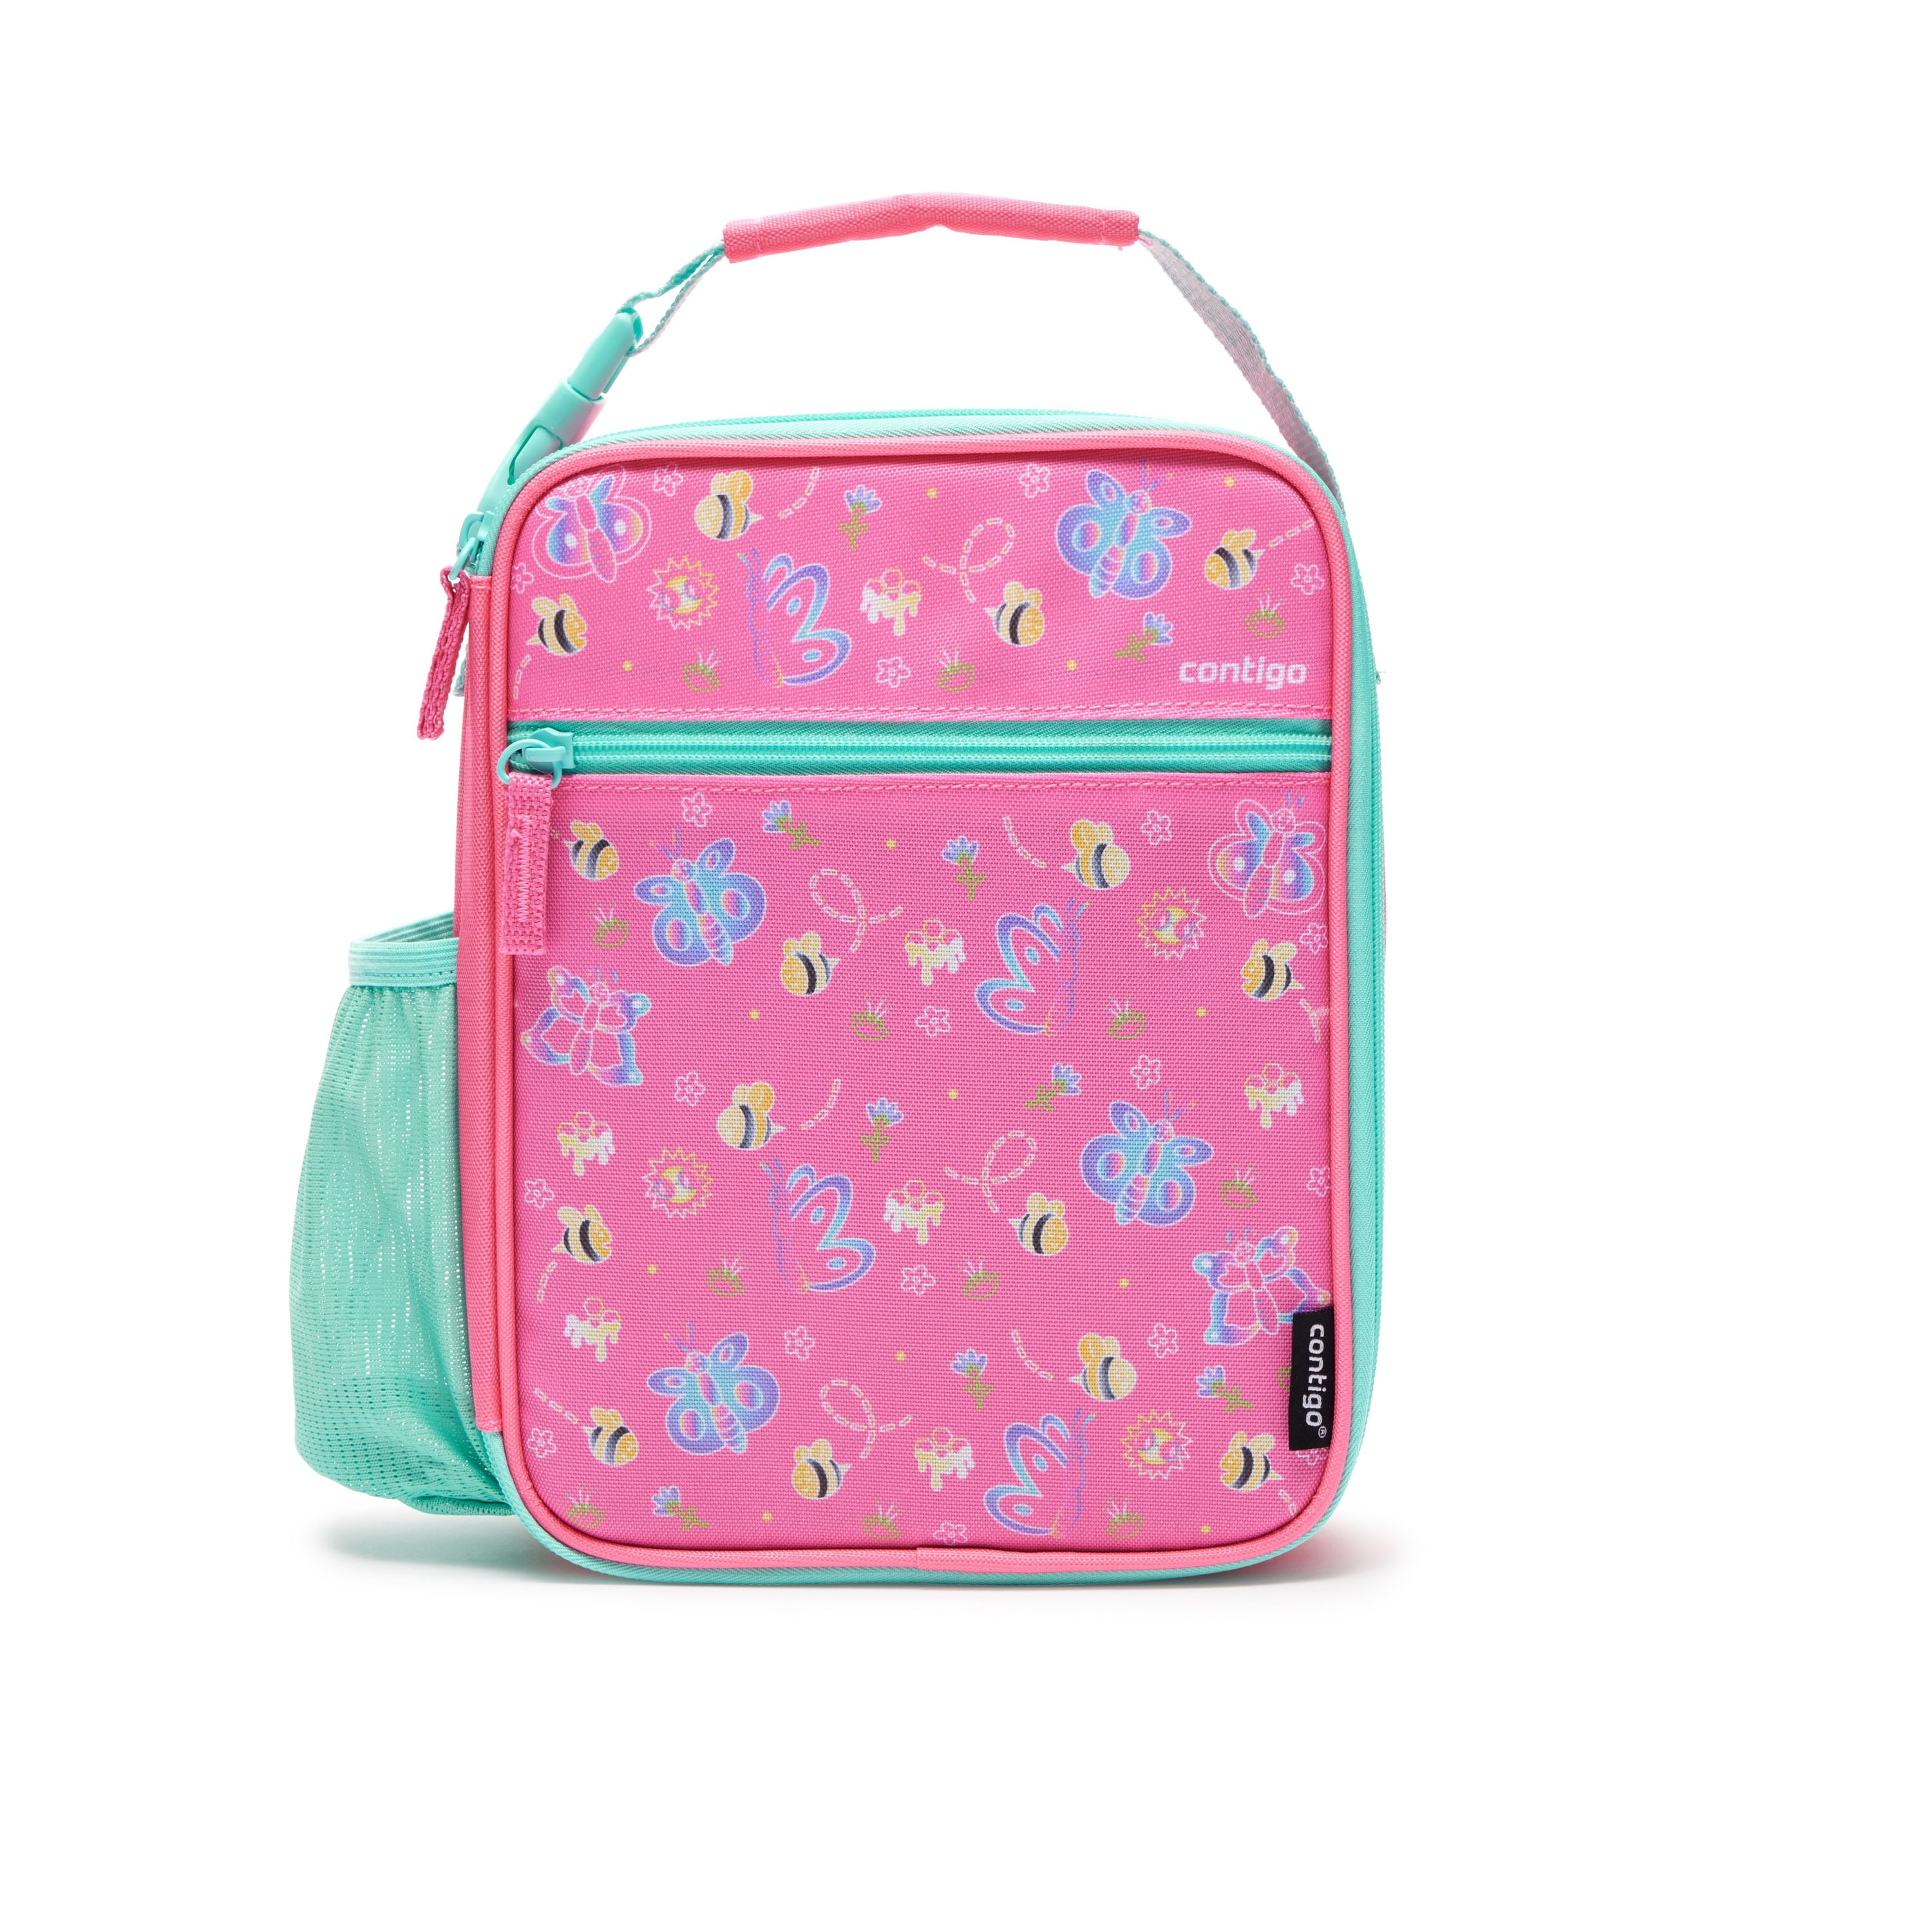 Contigo Kids Insulated Reusable Lunch Box with Antimicrobial Liner and Water Bottle Holder, Pink